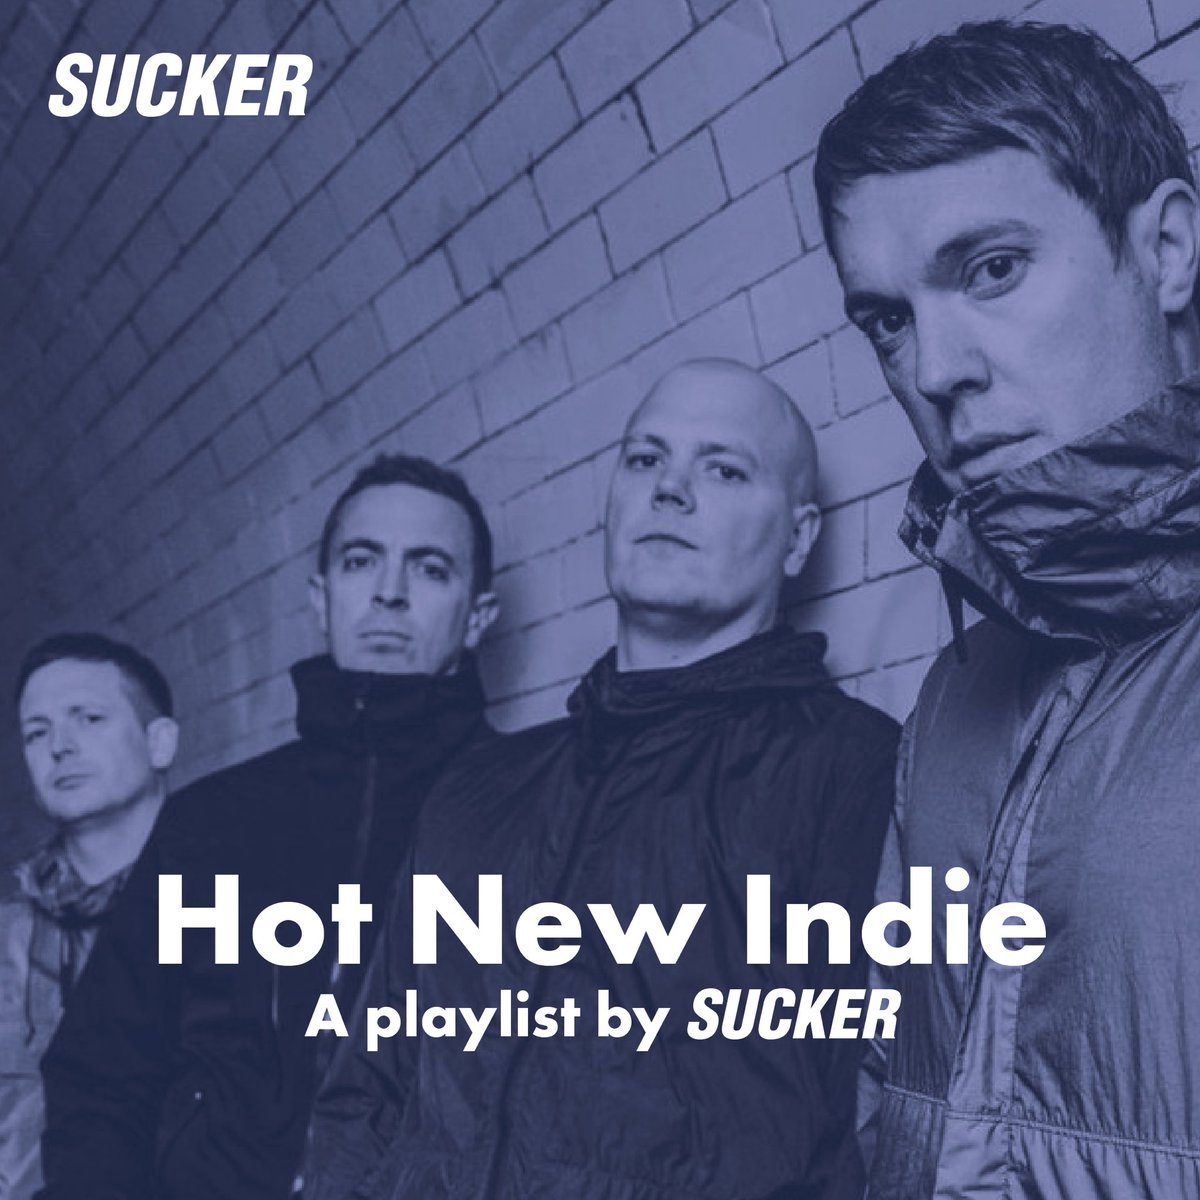 Fresh update for our HOT NEW INDIE playlist with @SkylightsYRA on the cover! Listen here: bit.ly/HotNewIndieSuc… Also ft. @bandfoxglove @DAMEmusicuk @JustJackMusic @Themanateesband @NightSocietyBND @sonicseagirls and more! 🍭